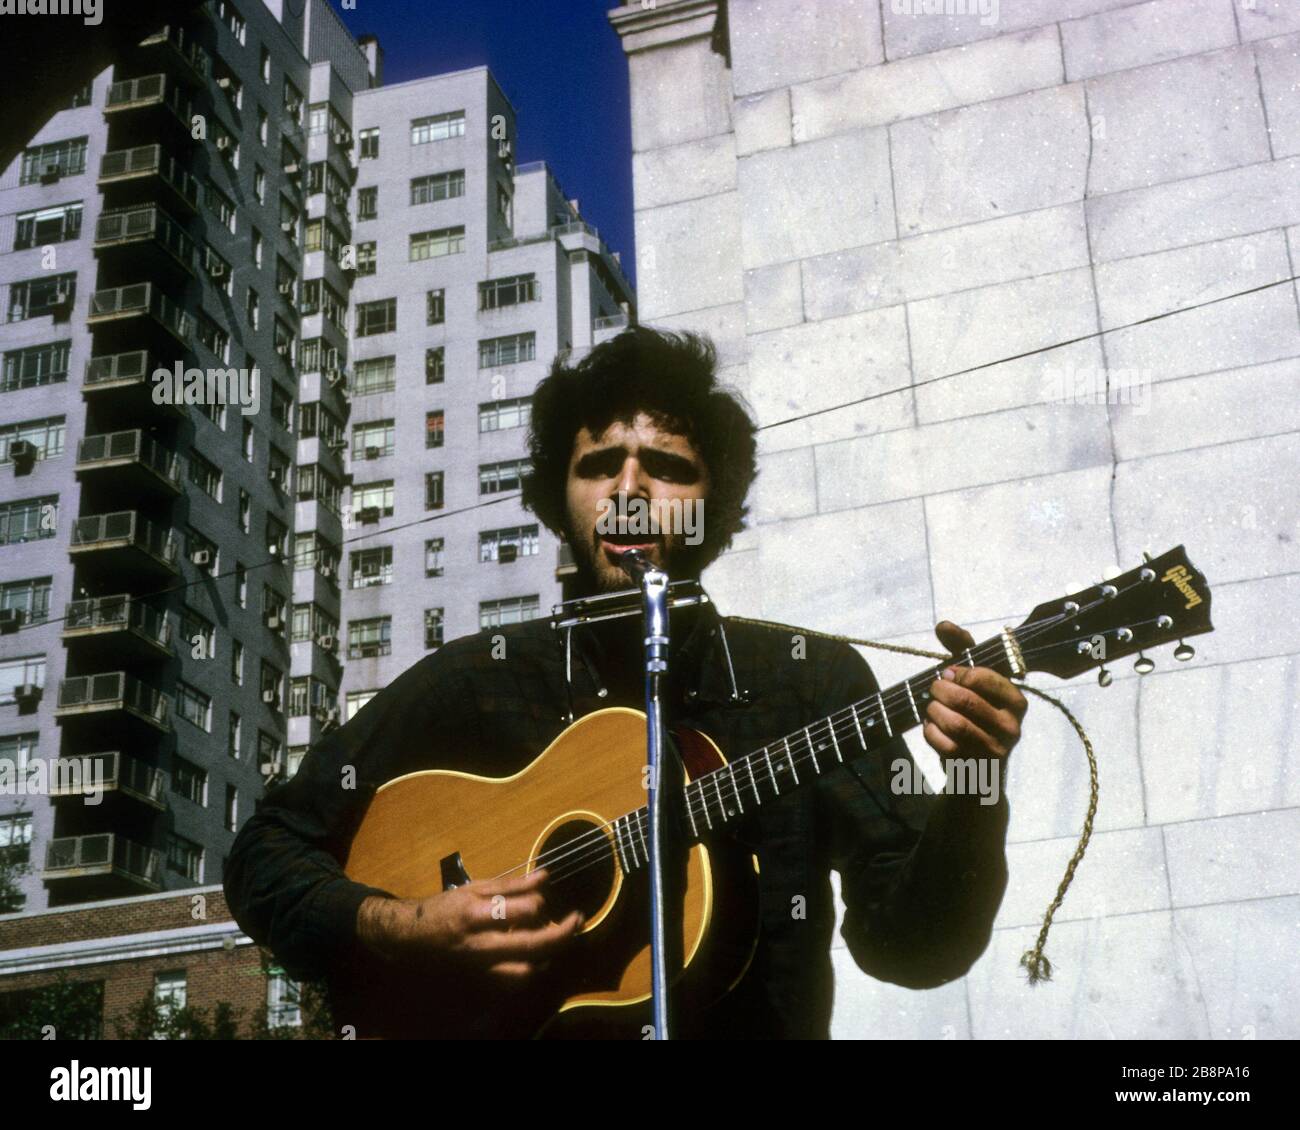 1968, Washington Square Park, New York City Famous local musician playing guitar and singing anti war songs Stock Photo